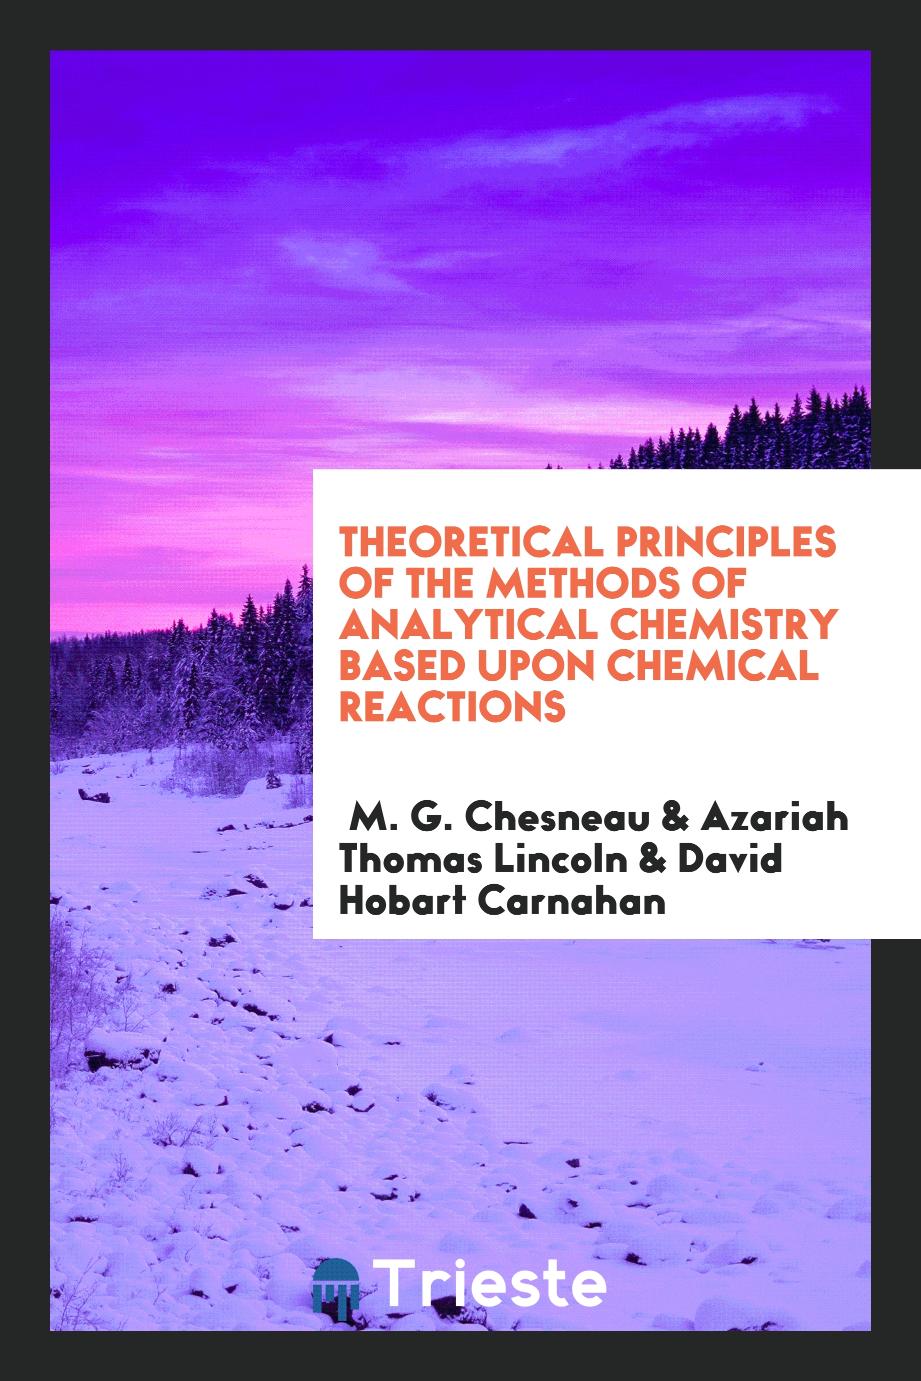 Theoretical principles of the methods of analytical chemistry based upon chemical reactions